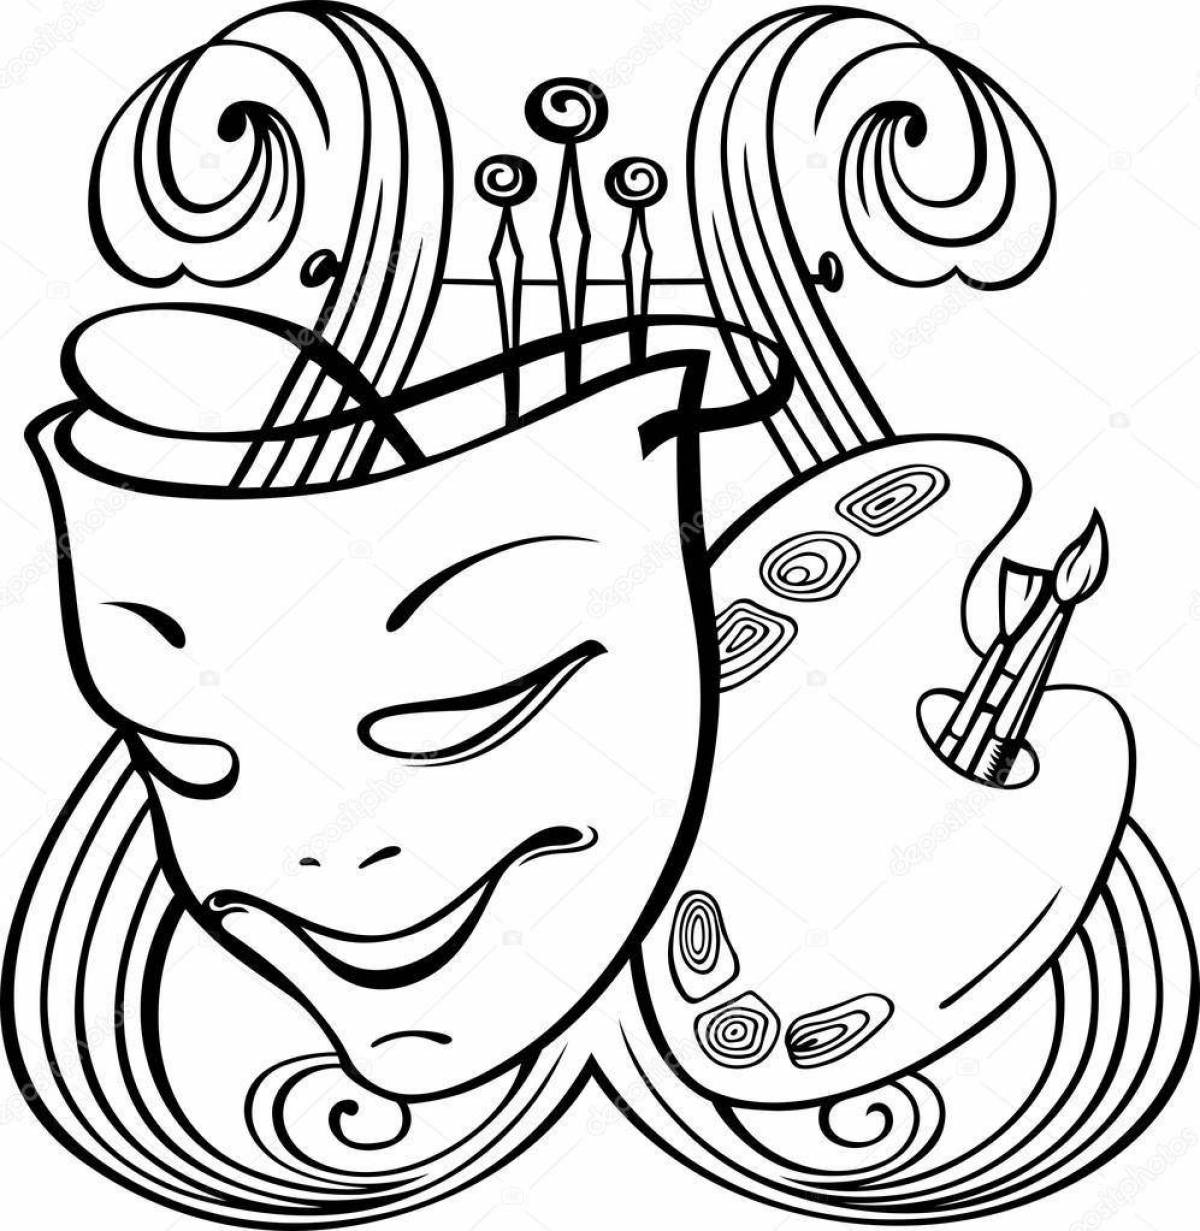 Exciting theatrical mask coloring book